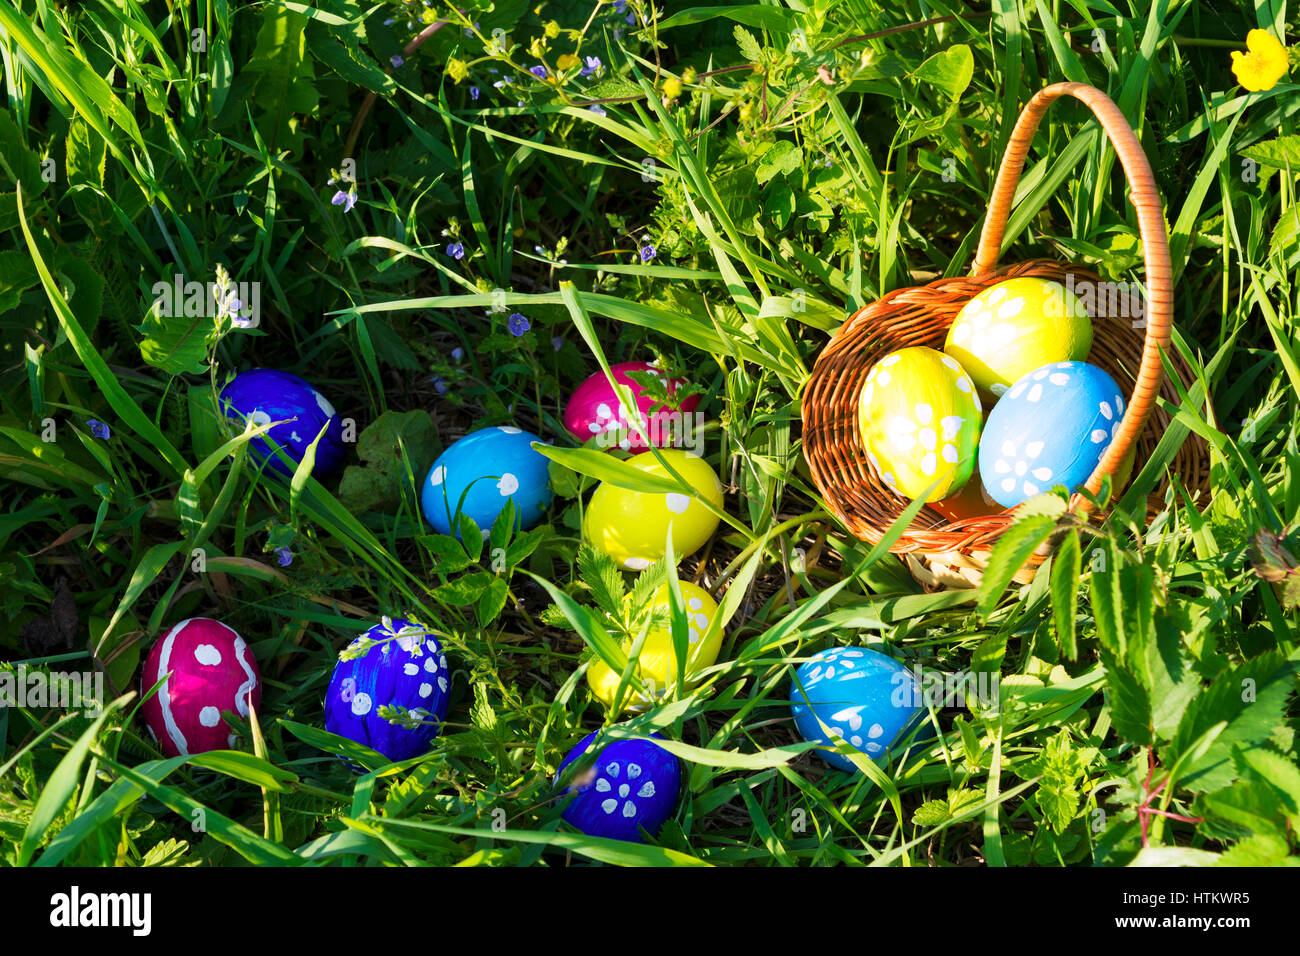 Easter background with hand painted eggs and wicker basket in green grass. Happy Easter greeting card or invitation. Stock Photo